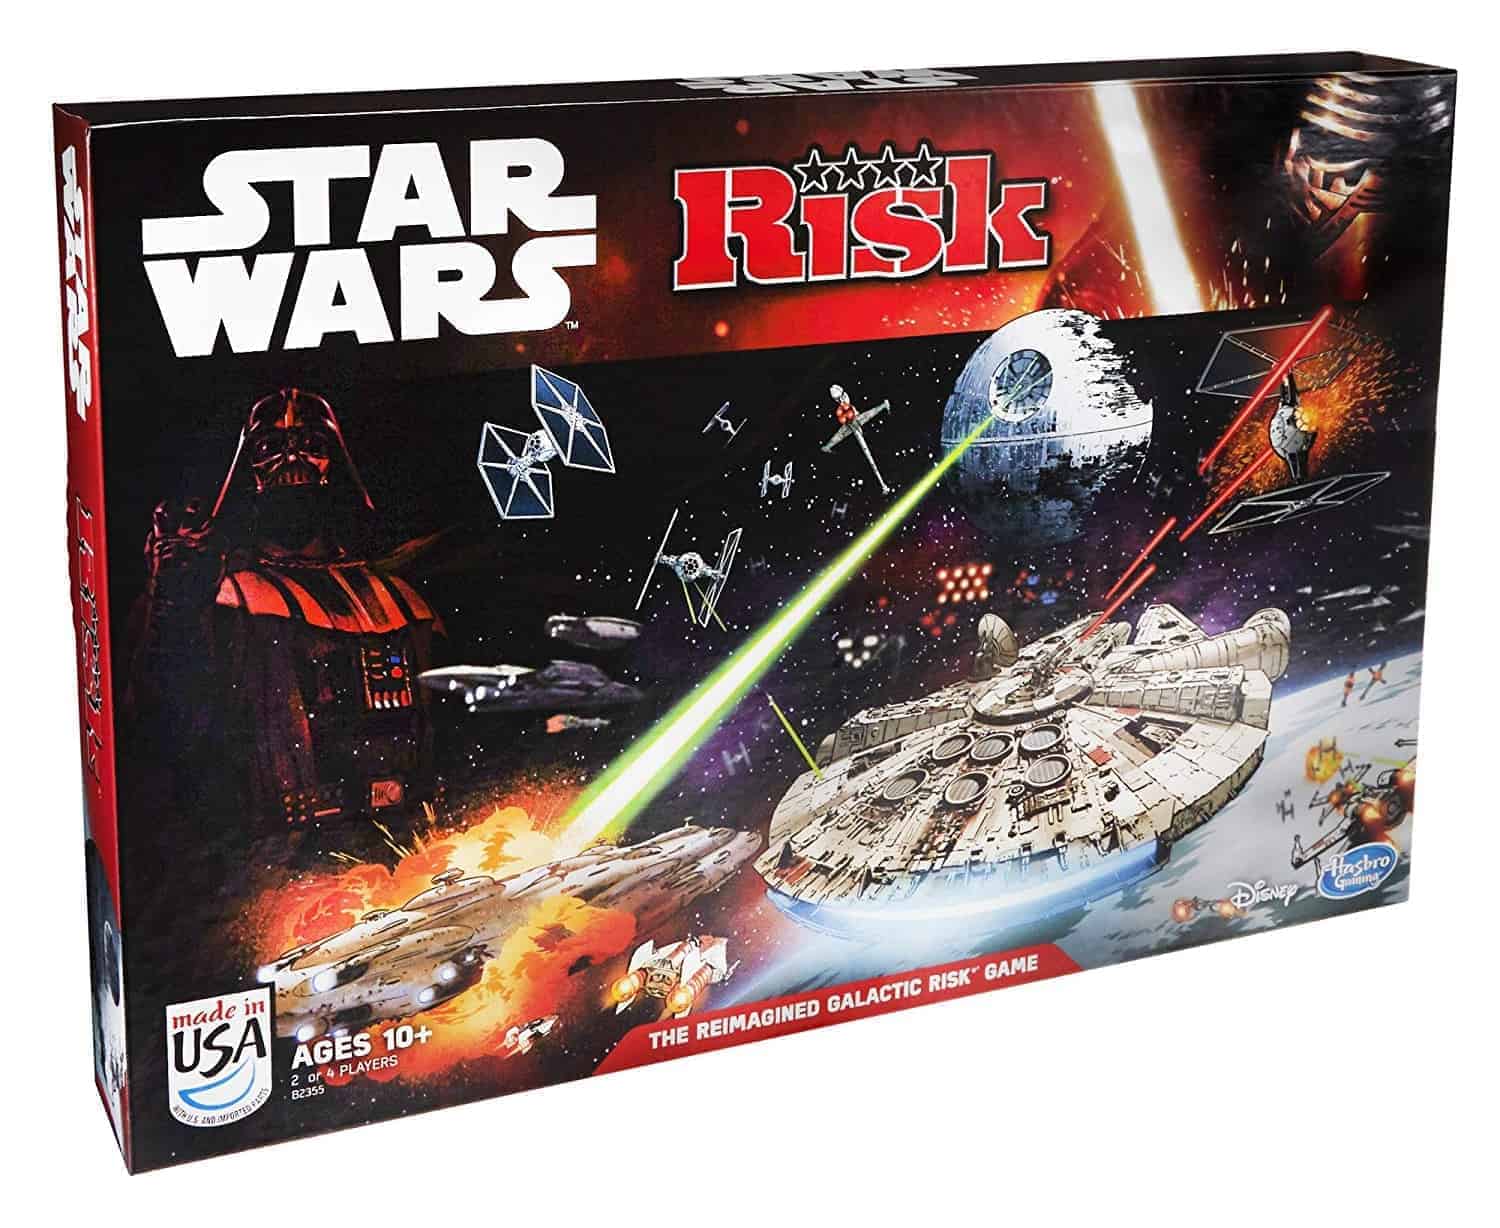 Risk Star Wars Edition is amongst the top 5 best board star wars games for easy, quick yet fun play!